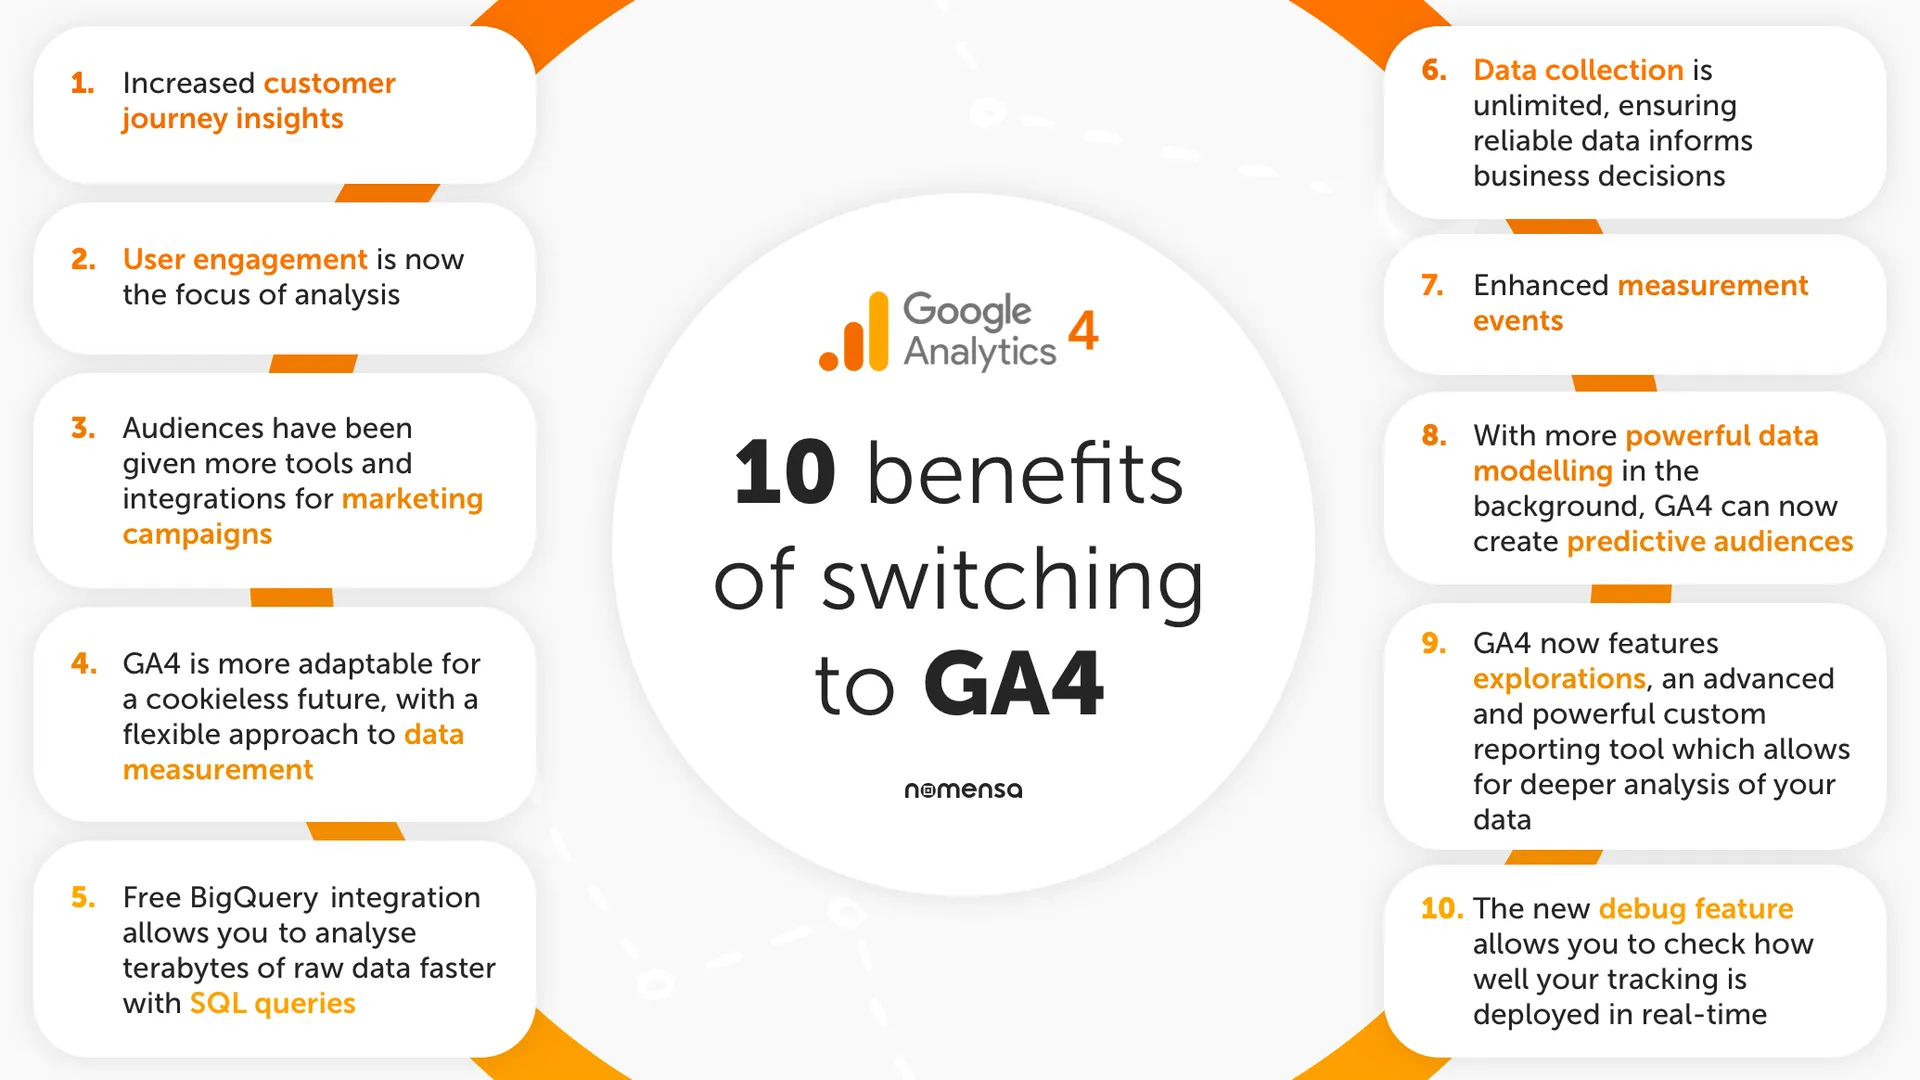 Benefits of GA4

Event-Driven Tracking: GA4 focuses on event-driven tracking rather than relying solely on pageviews. This means you can track various user interactions and events on your website or app, providing a more detailed understanding of user behavior.

Cross-Platform Tracking: GA4 is designed to track user interactions across multiple platforms, including websites, mobile apps, and even offline interactions. This allows you to get a more comprehensive view of how users interact with your brand across different touchpoints.

Enhanced User Journey Analysis: GA4 offers a more holistic view of the user journey by providing insights into the entire customer lifecycle, from acquisition to conversion and retention. This enables you to identify opportunities to optimize the user experience at every stage.

Predictive Metrics: GA4 includes predictive metrics powered by machine learning, which can give you insights into potential future outcomes based on historical data trends. This can help you anticipate user behavior and take proactive actions.

More Flexible Event Tracking: GA4 provides more flexibility in defining and tracking custom events. You can easily set up events that are relevant to your specific business goals and track them without extensive coding.

Simplified Implementation: GA4 offers a simplified and more streamlined implementation process compared to previous versions. This can make it easier for businesses to set up and start tracking their data.

Privacy and Compliance: GA4 is designed with privacy in mind, and it's built to align with user privacy preferences and data protection regulations. It supports features like enhanced consent mode and data deletion, which can help businesses comply with data privacy laws.

Funnels and Path Analysis: GA4 provides more advanced funnel analysis and path analysis capabilities, allowing you to visualize how users move through different stages of the conversion process and identify where they drop off.

Real-Time Reporting: GA4 offers more real-time reporting capabilities, allowing you to see user interactions and events as they happen, which can be particularly useful for monitoring live campaigns.

Custom Reporting: GA4's analysis tools provide more customization options, allowing you to create custom reports and segments tailored to your specific business needs.

It's worth noting that while GA4 offers many advantages, transitioning from Universal Analytics to GA4 might require some adjustments and learning, especially if you're used to the older version. However, since GA4 is Google's future-focused platform, adopting it early can provide you with valuable insights and data tracking capabilities for your digital marketing efforts.